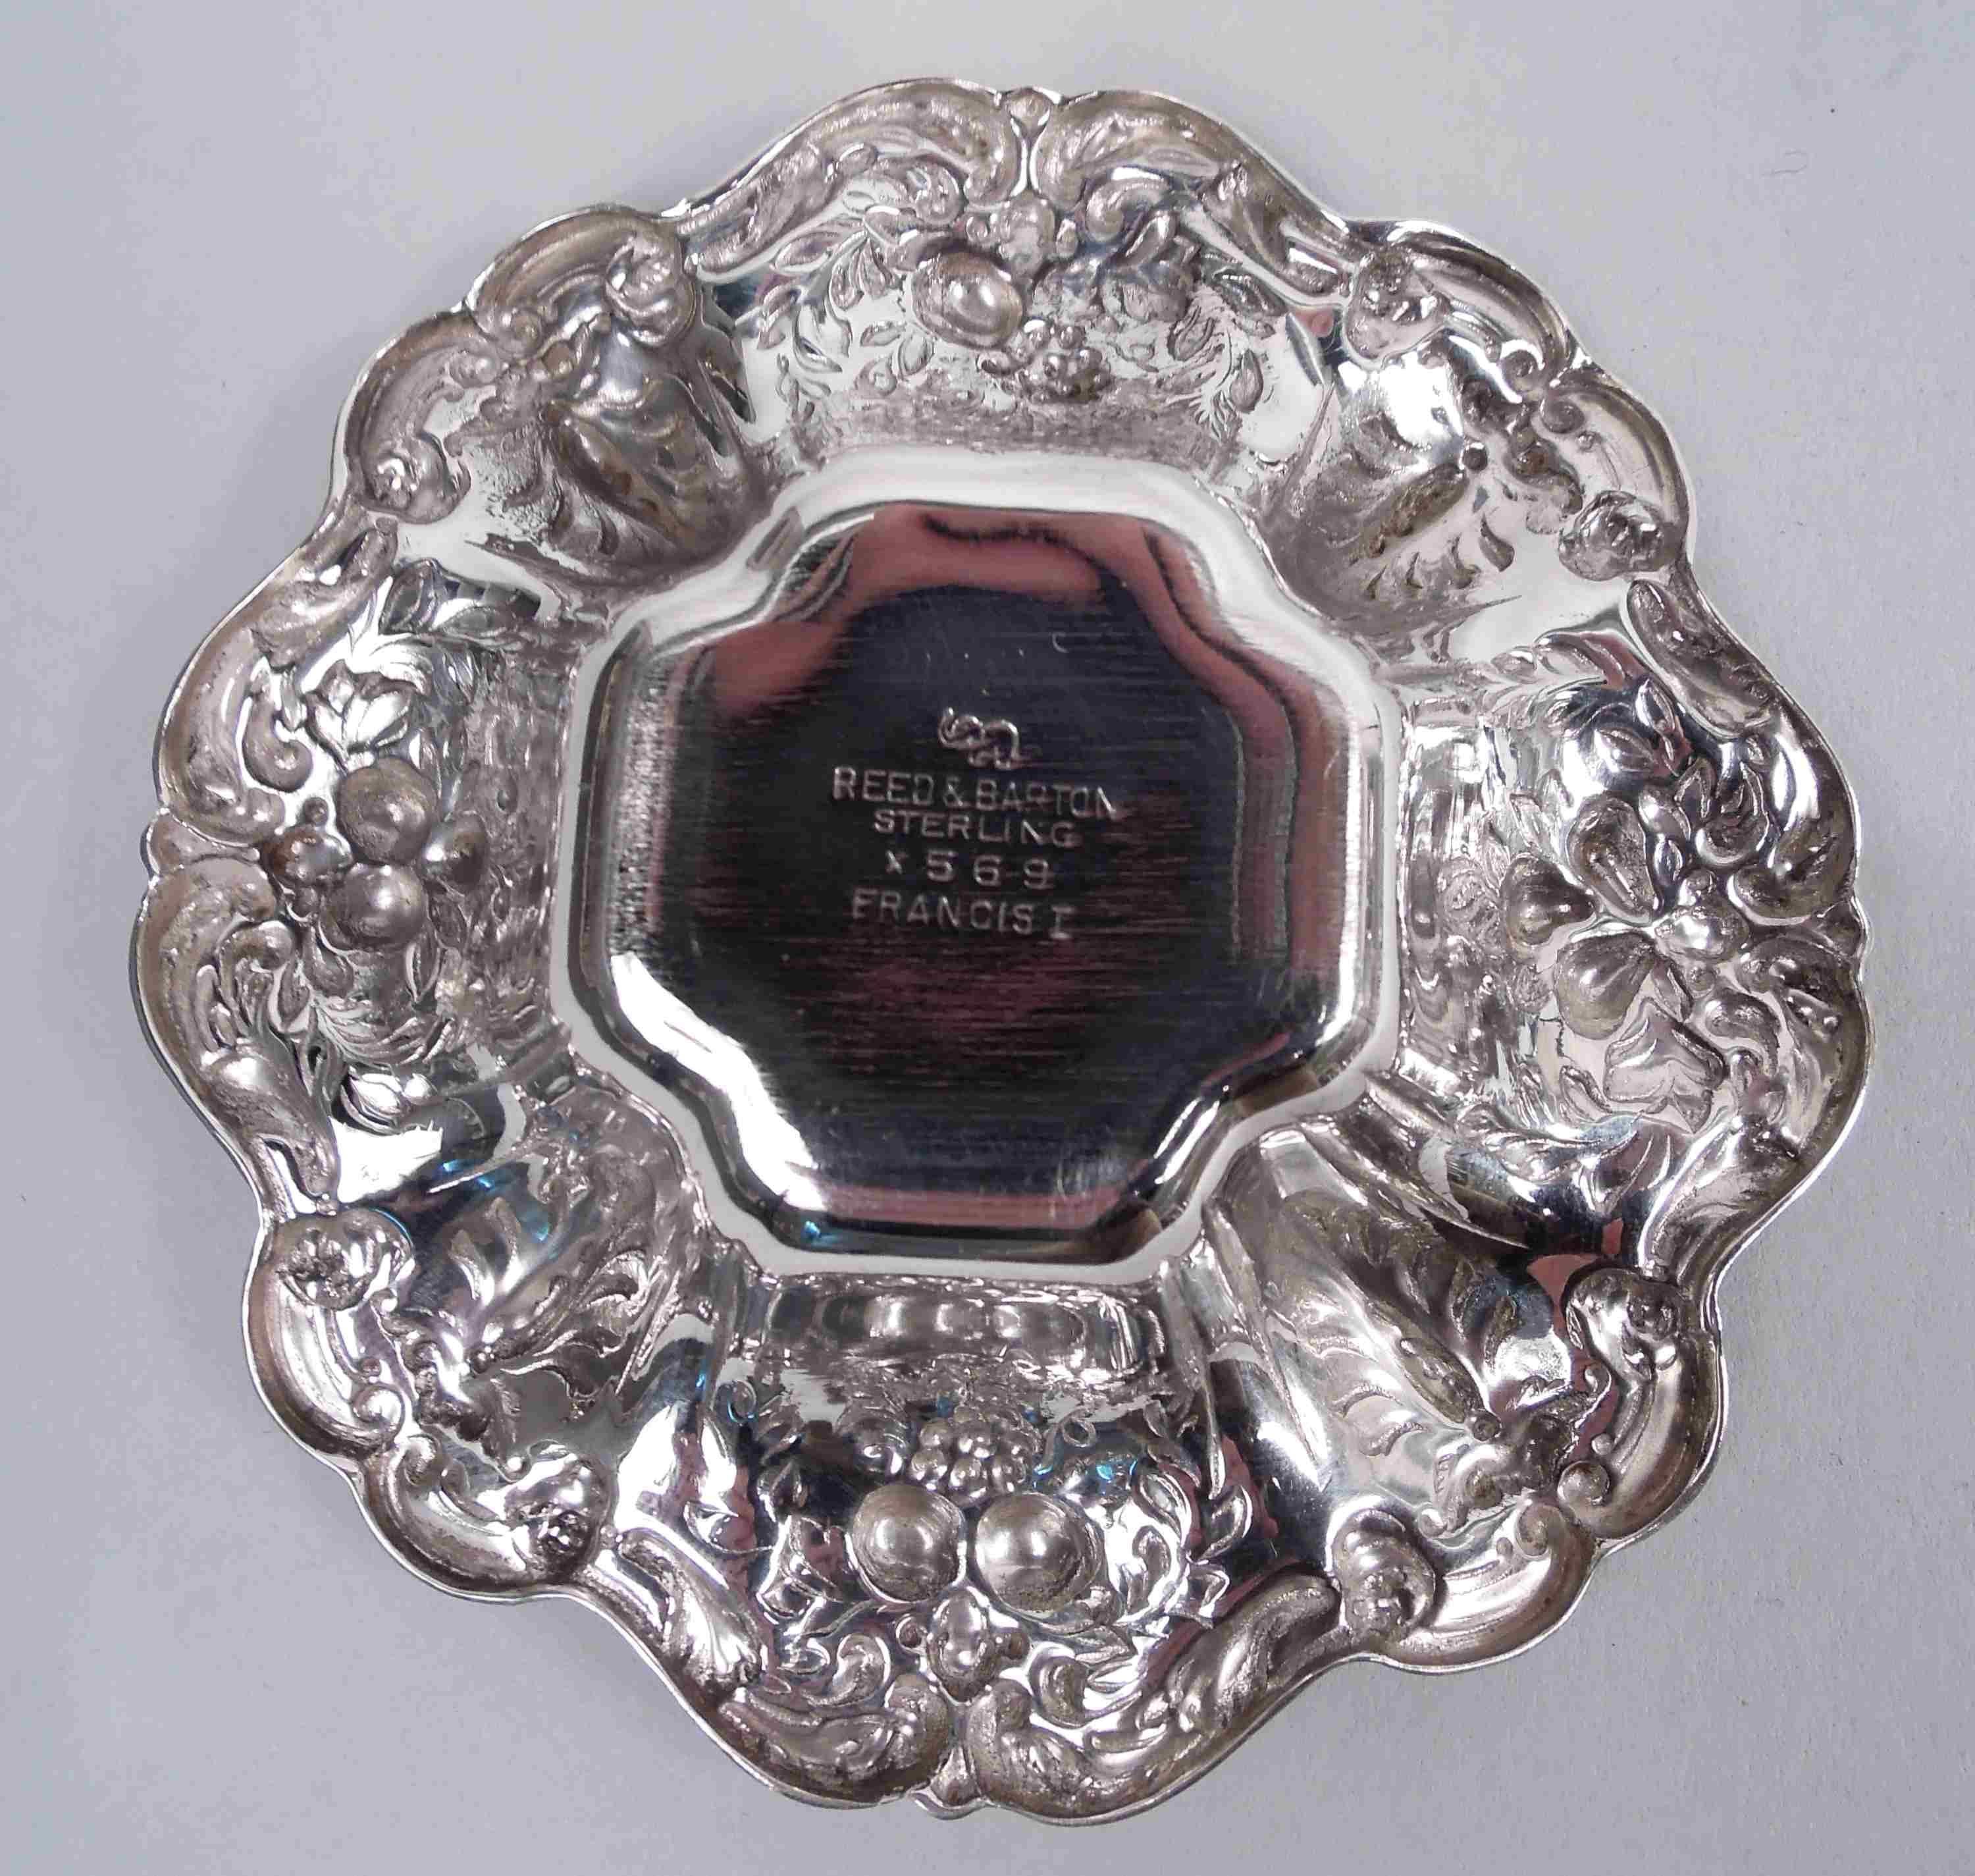 Set of 7 Reed & Barton Francis I Sterling Silver Nut Dishes In Good Condition For Sale In New York, NY